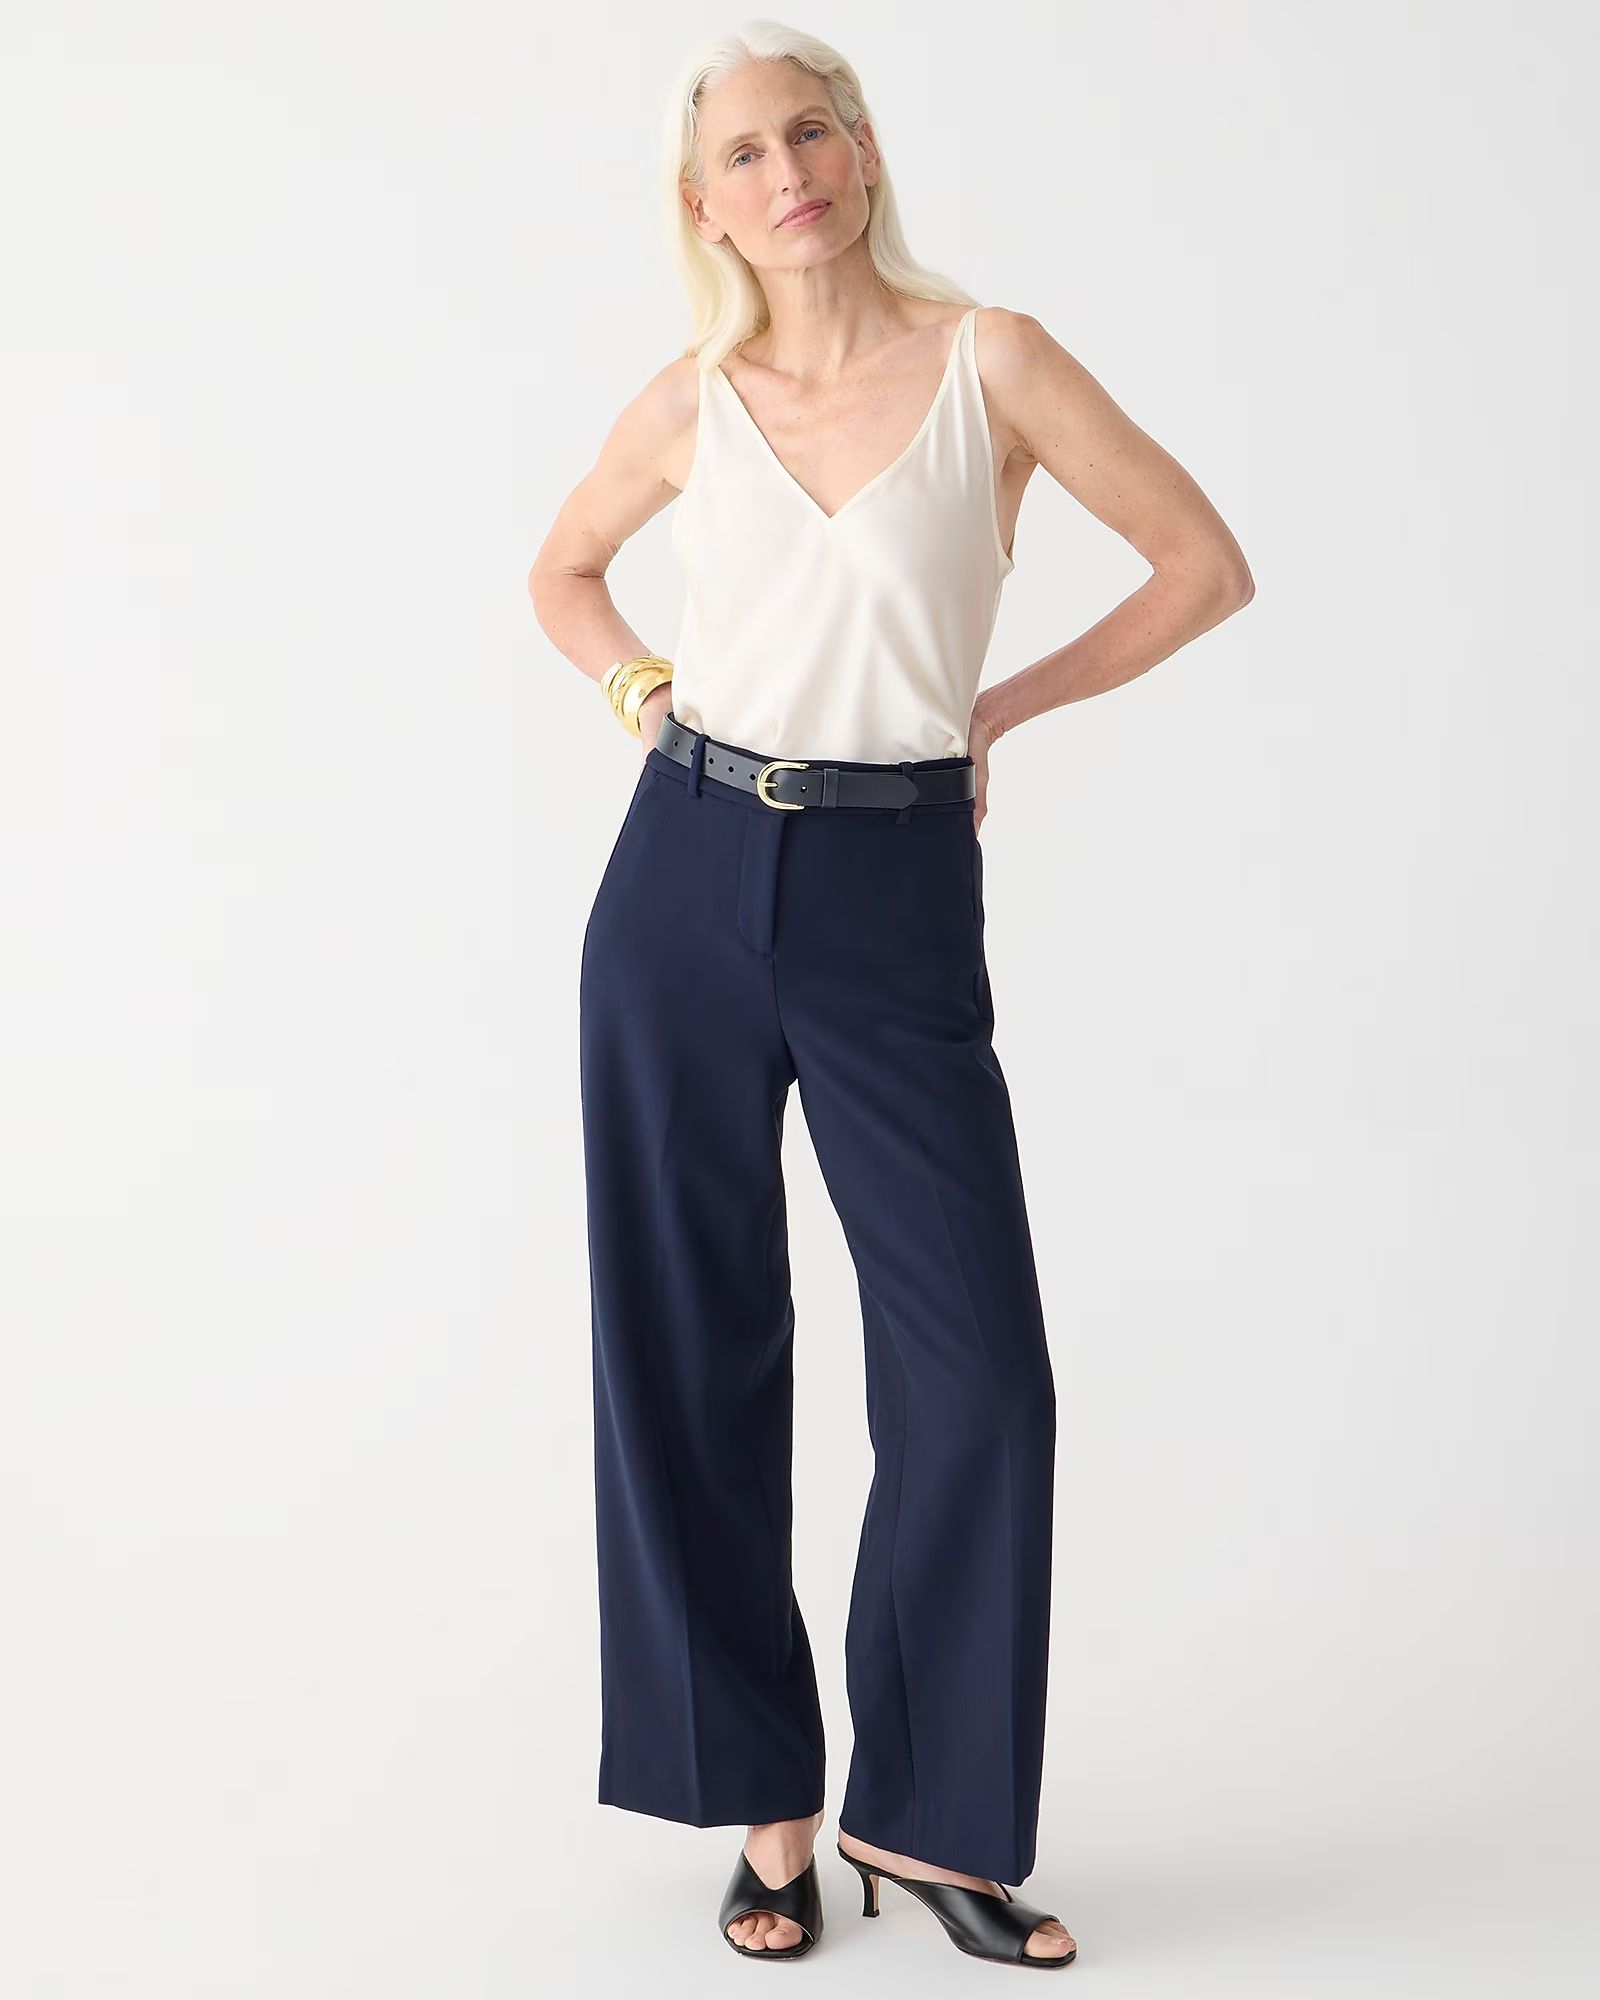 top rated4.2(49 REVIEWS)Sydney wide-leg pant in four-season stretch$99.50$128.00 (22% Off)NavyCla... | J.Crew US